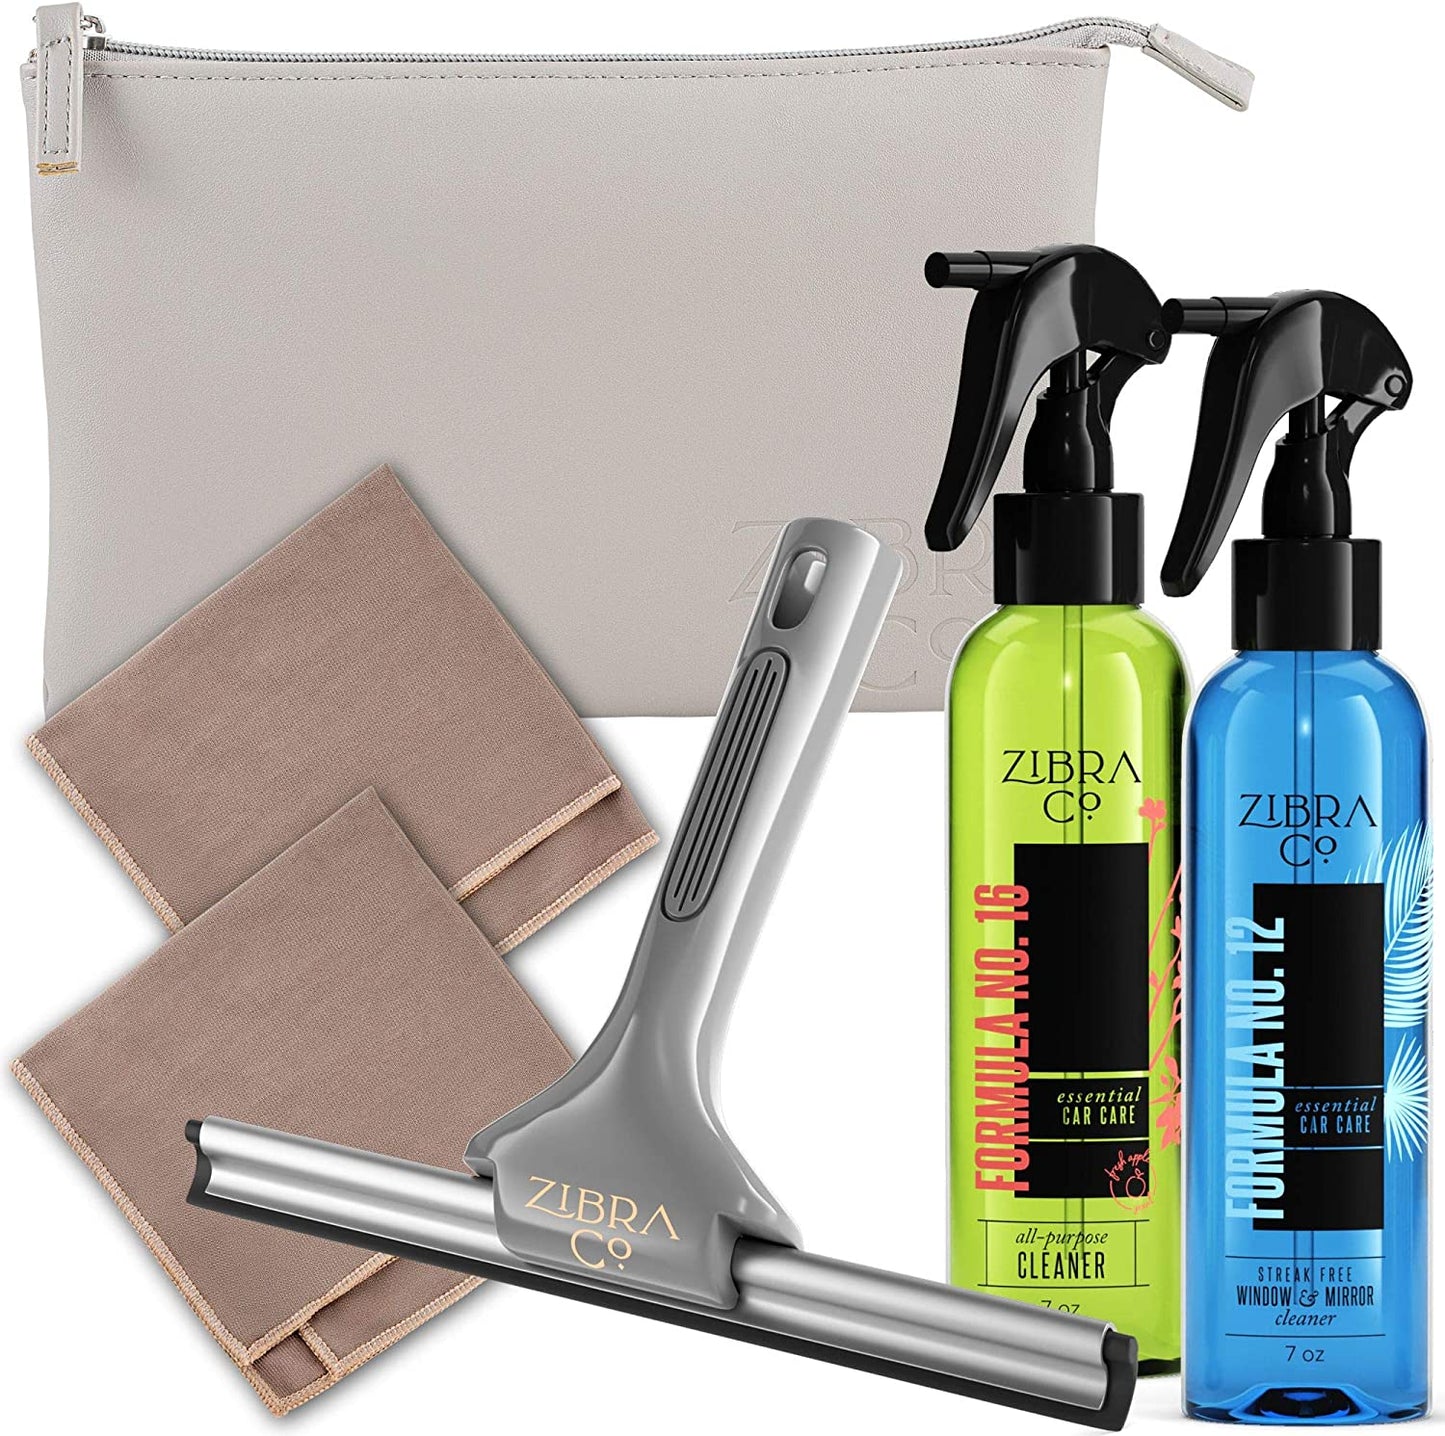 Car Cleaning Kit - All Purpose Cleaner Spray, Window Cleaner, Squeegee Scrubber, 2 Microfiber Glass Cleaner Cloth, Genuine Leather Pouch - Auto RV Accessories for Inside Surfaces, Glass, Windshield